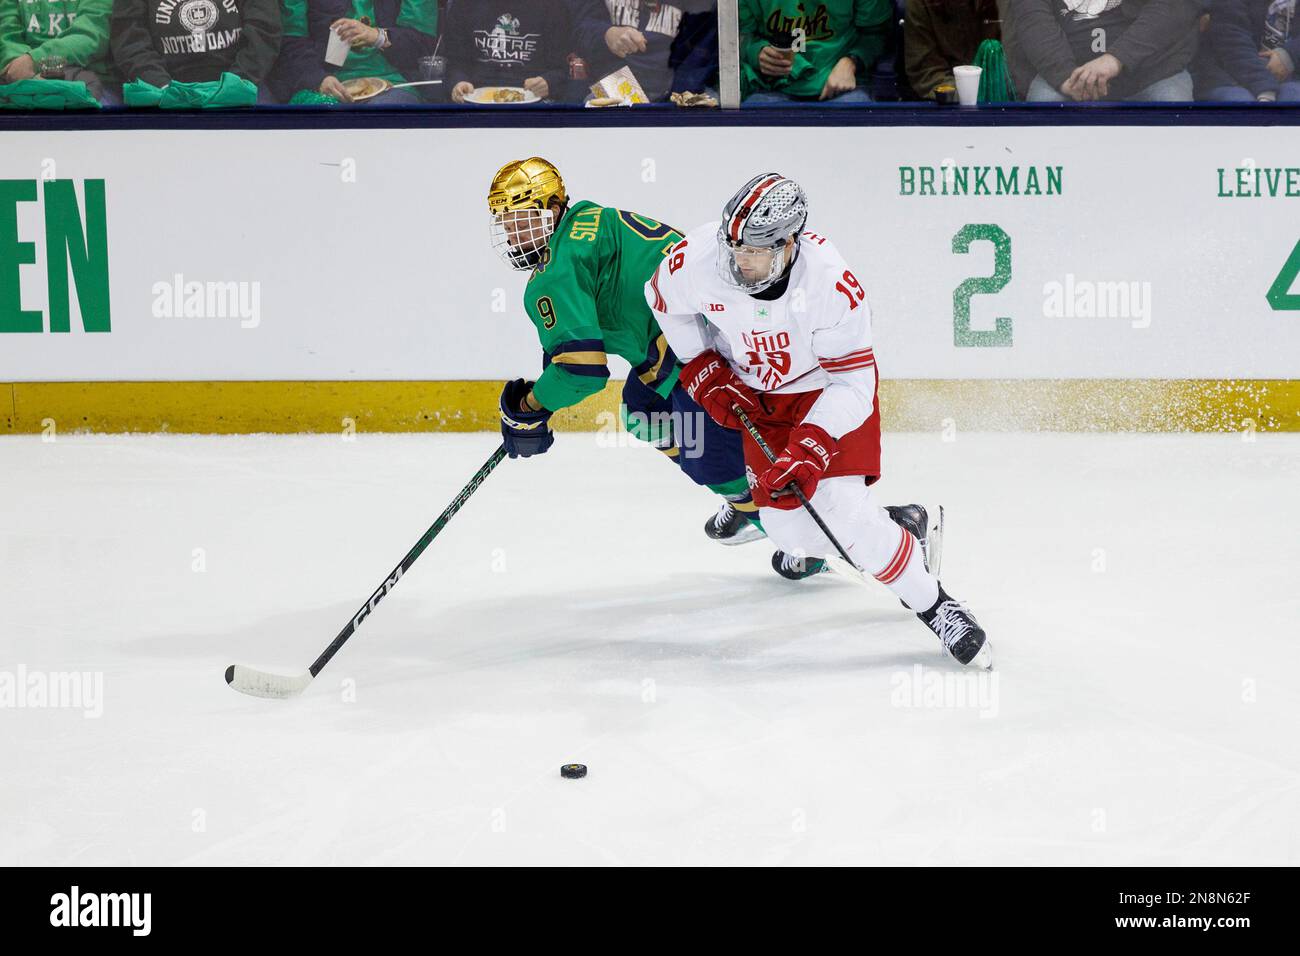 South Bend, Indiana, USA. 11th Feb, 2023. Ohio State forward Stephen Halliday (19) and Notre Dame forward Grant Silianoff (9) skate for the loose puck during NCAA hockey game action between the Ohio State Buckeyes and the Notre Dame Fighting Irish at Compton Family Ice Arena in South Bend, Indiana. John Mersits/CSM/Alamy Live News Stock Photo